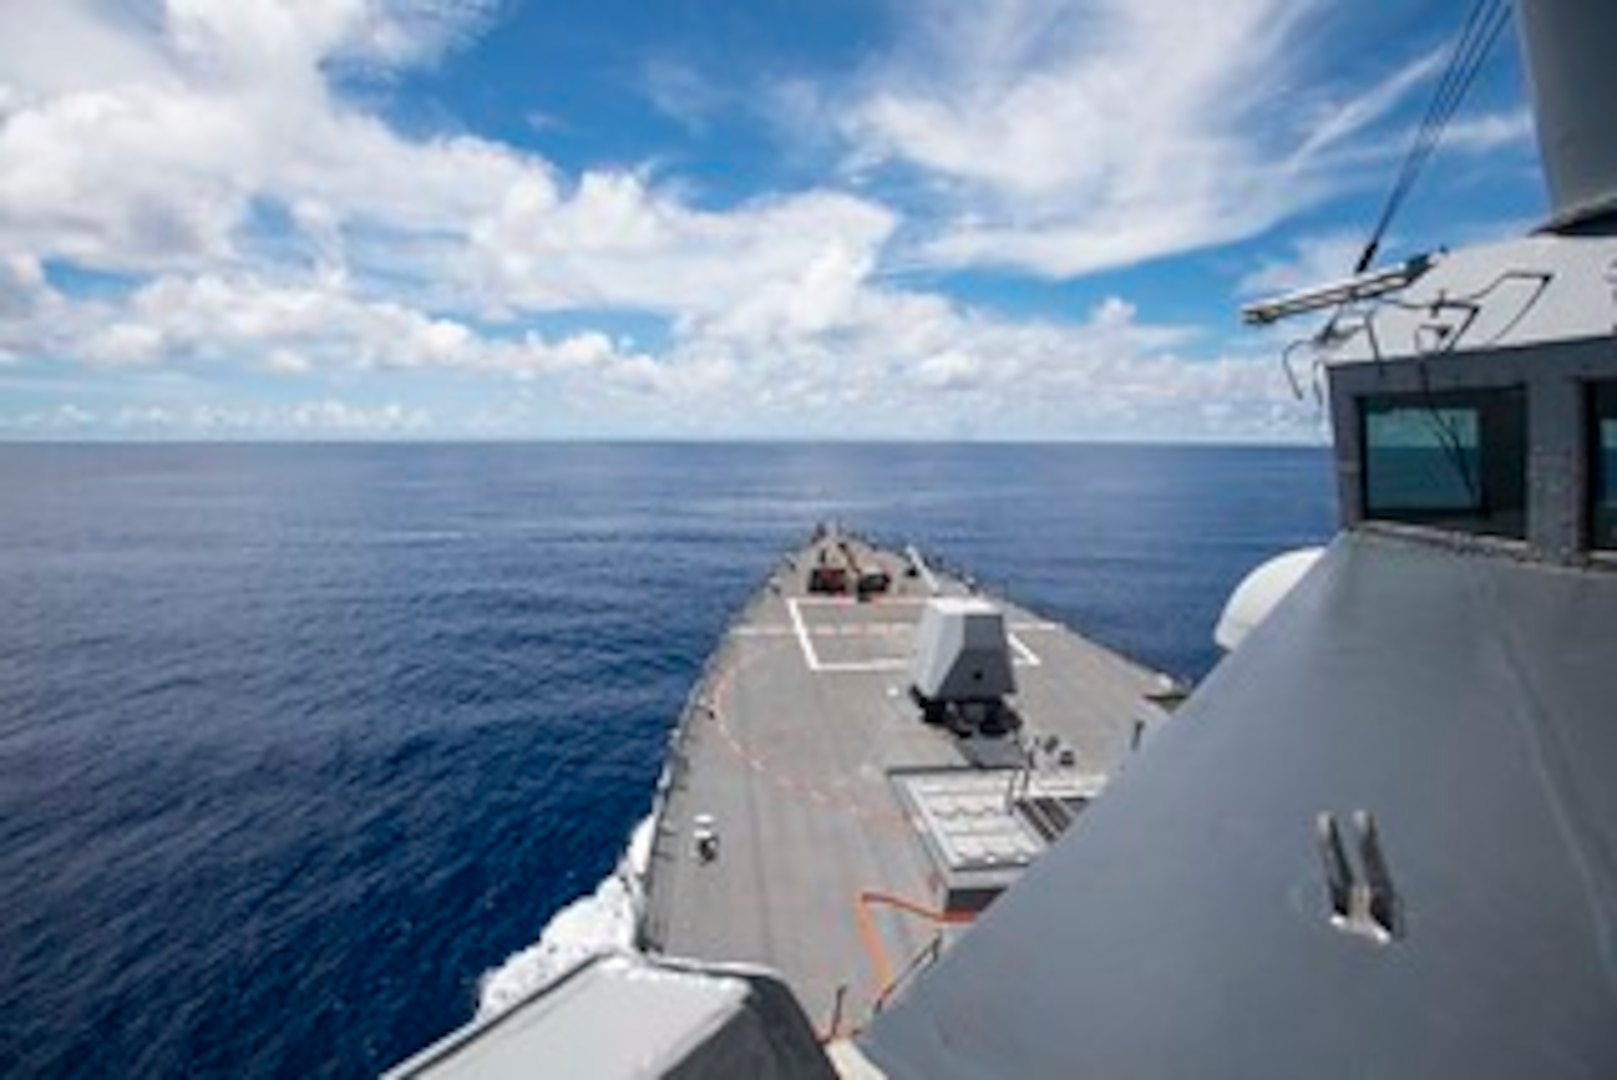 USS Ralph Johnson conducts freedom of navigation operation in South China Sea